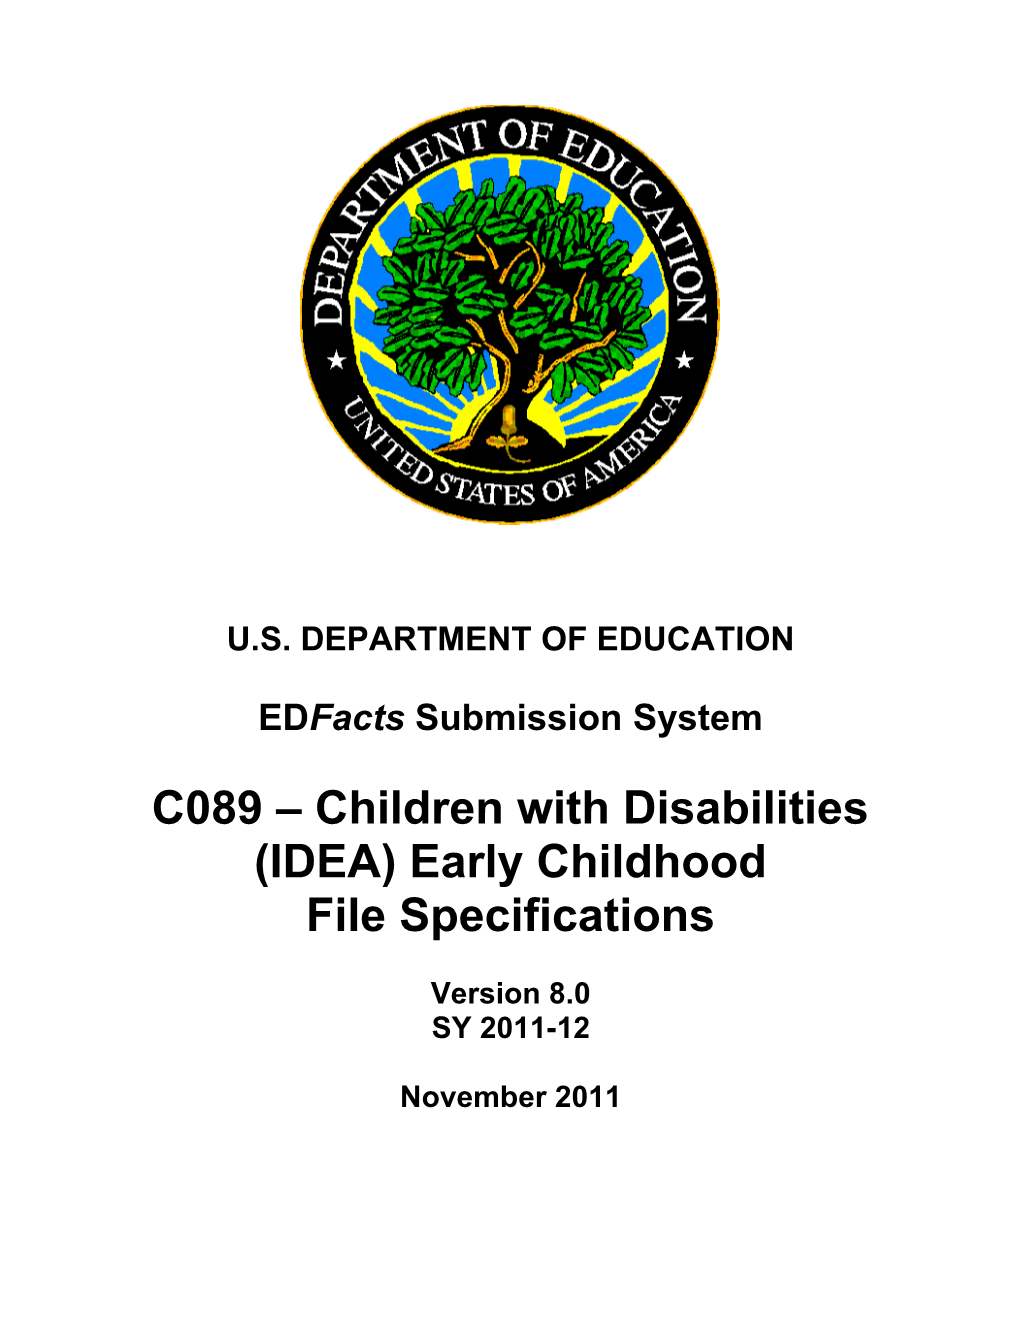 Children with Disabilities (IDEA) Early Childhood File Specifications